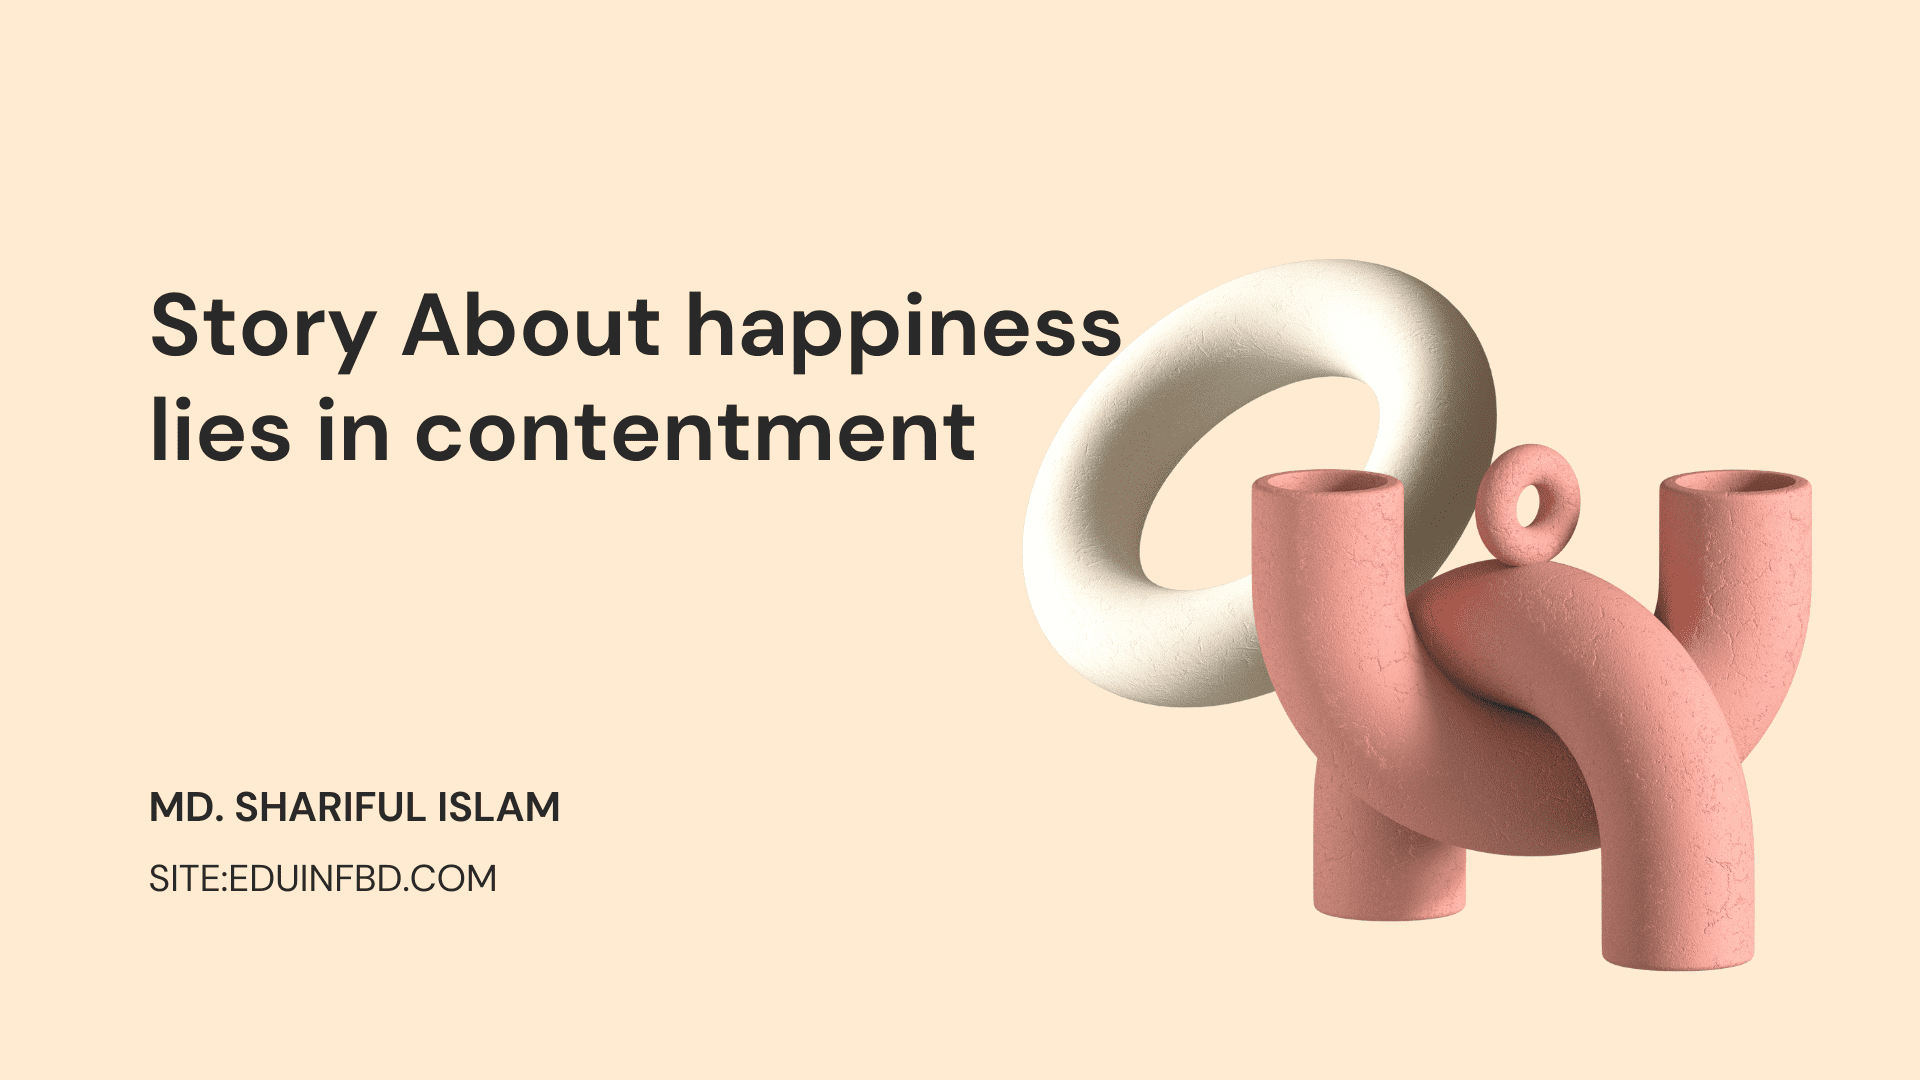 Story About happiness lies in contentment